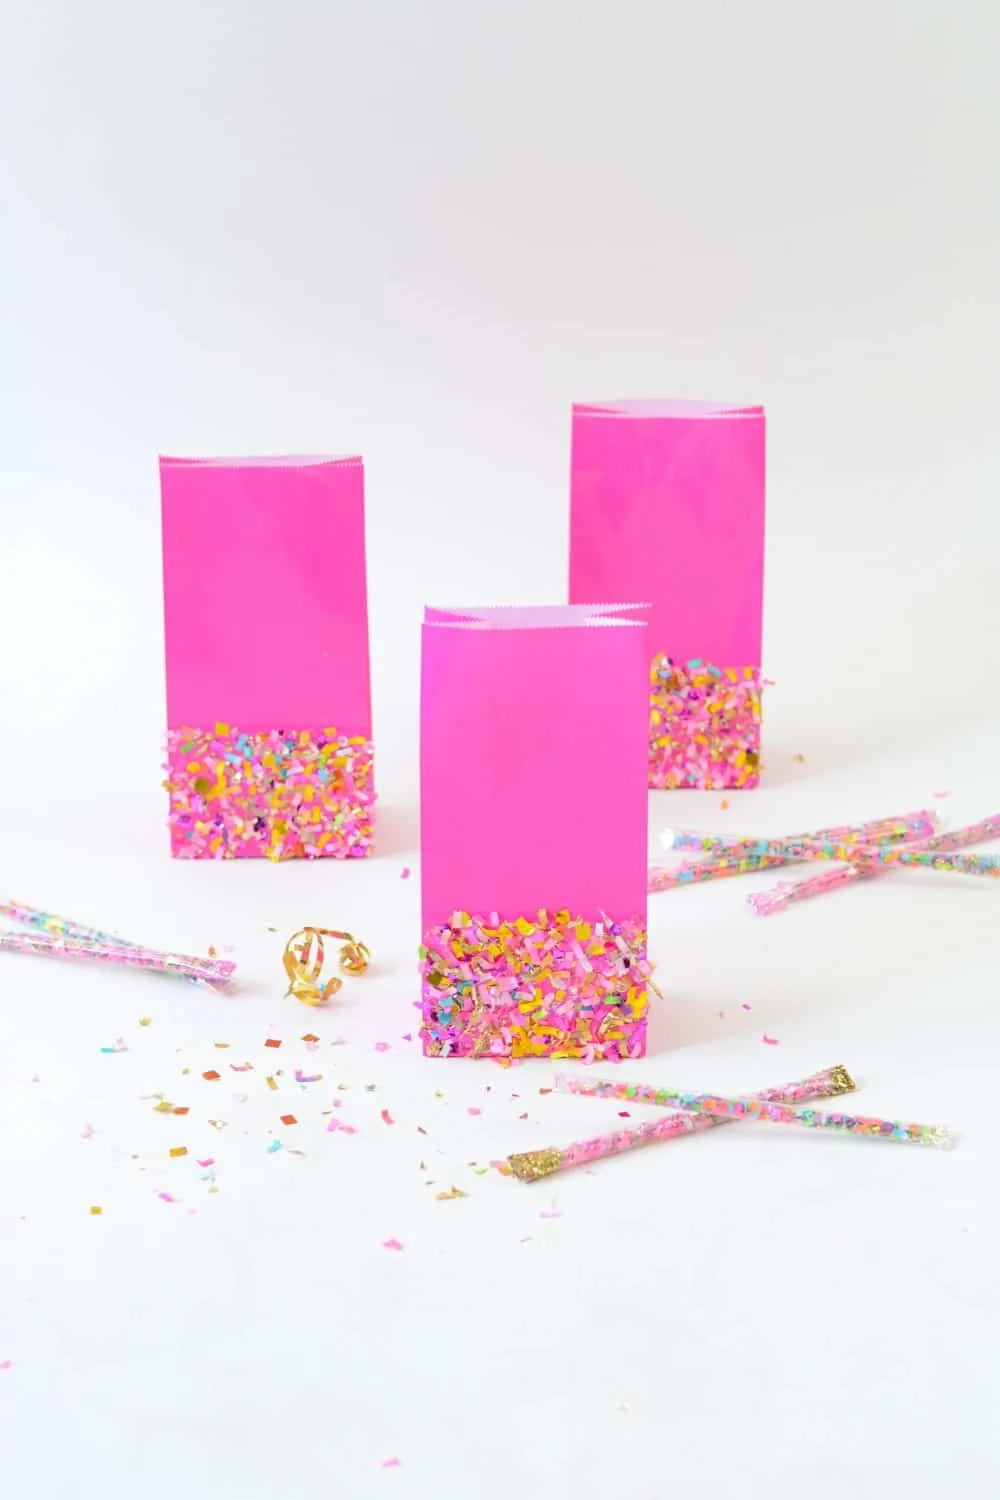 Three pink favor bags with confetti Mod Podged to the sides